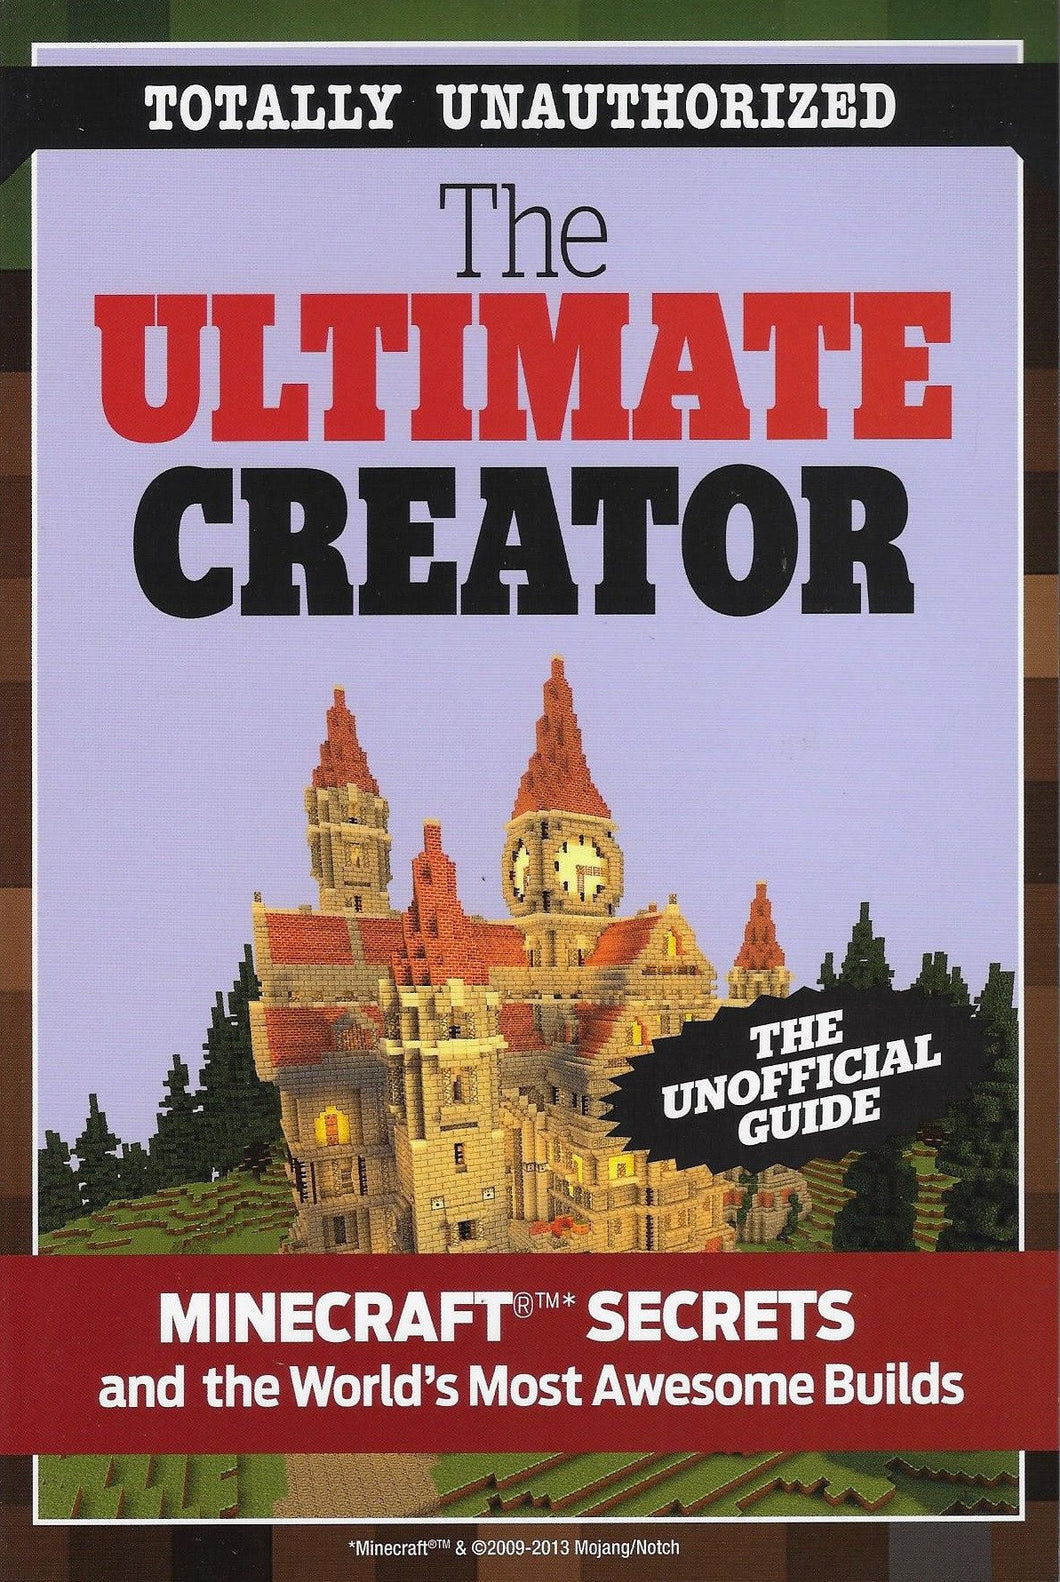 The Ultimate Creator: Minecraft®™ Secrets and the World's Most Awesome Builds